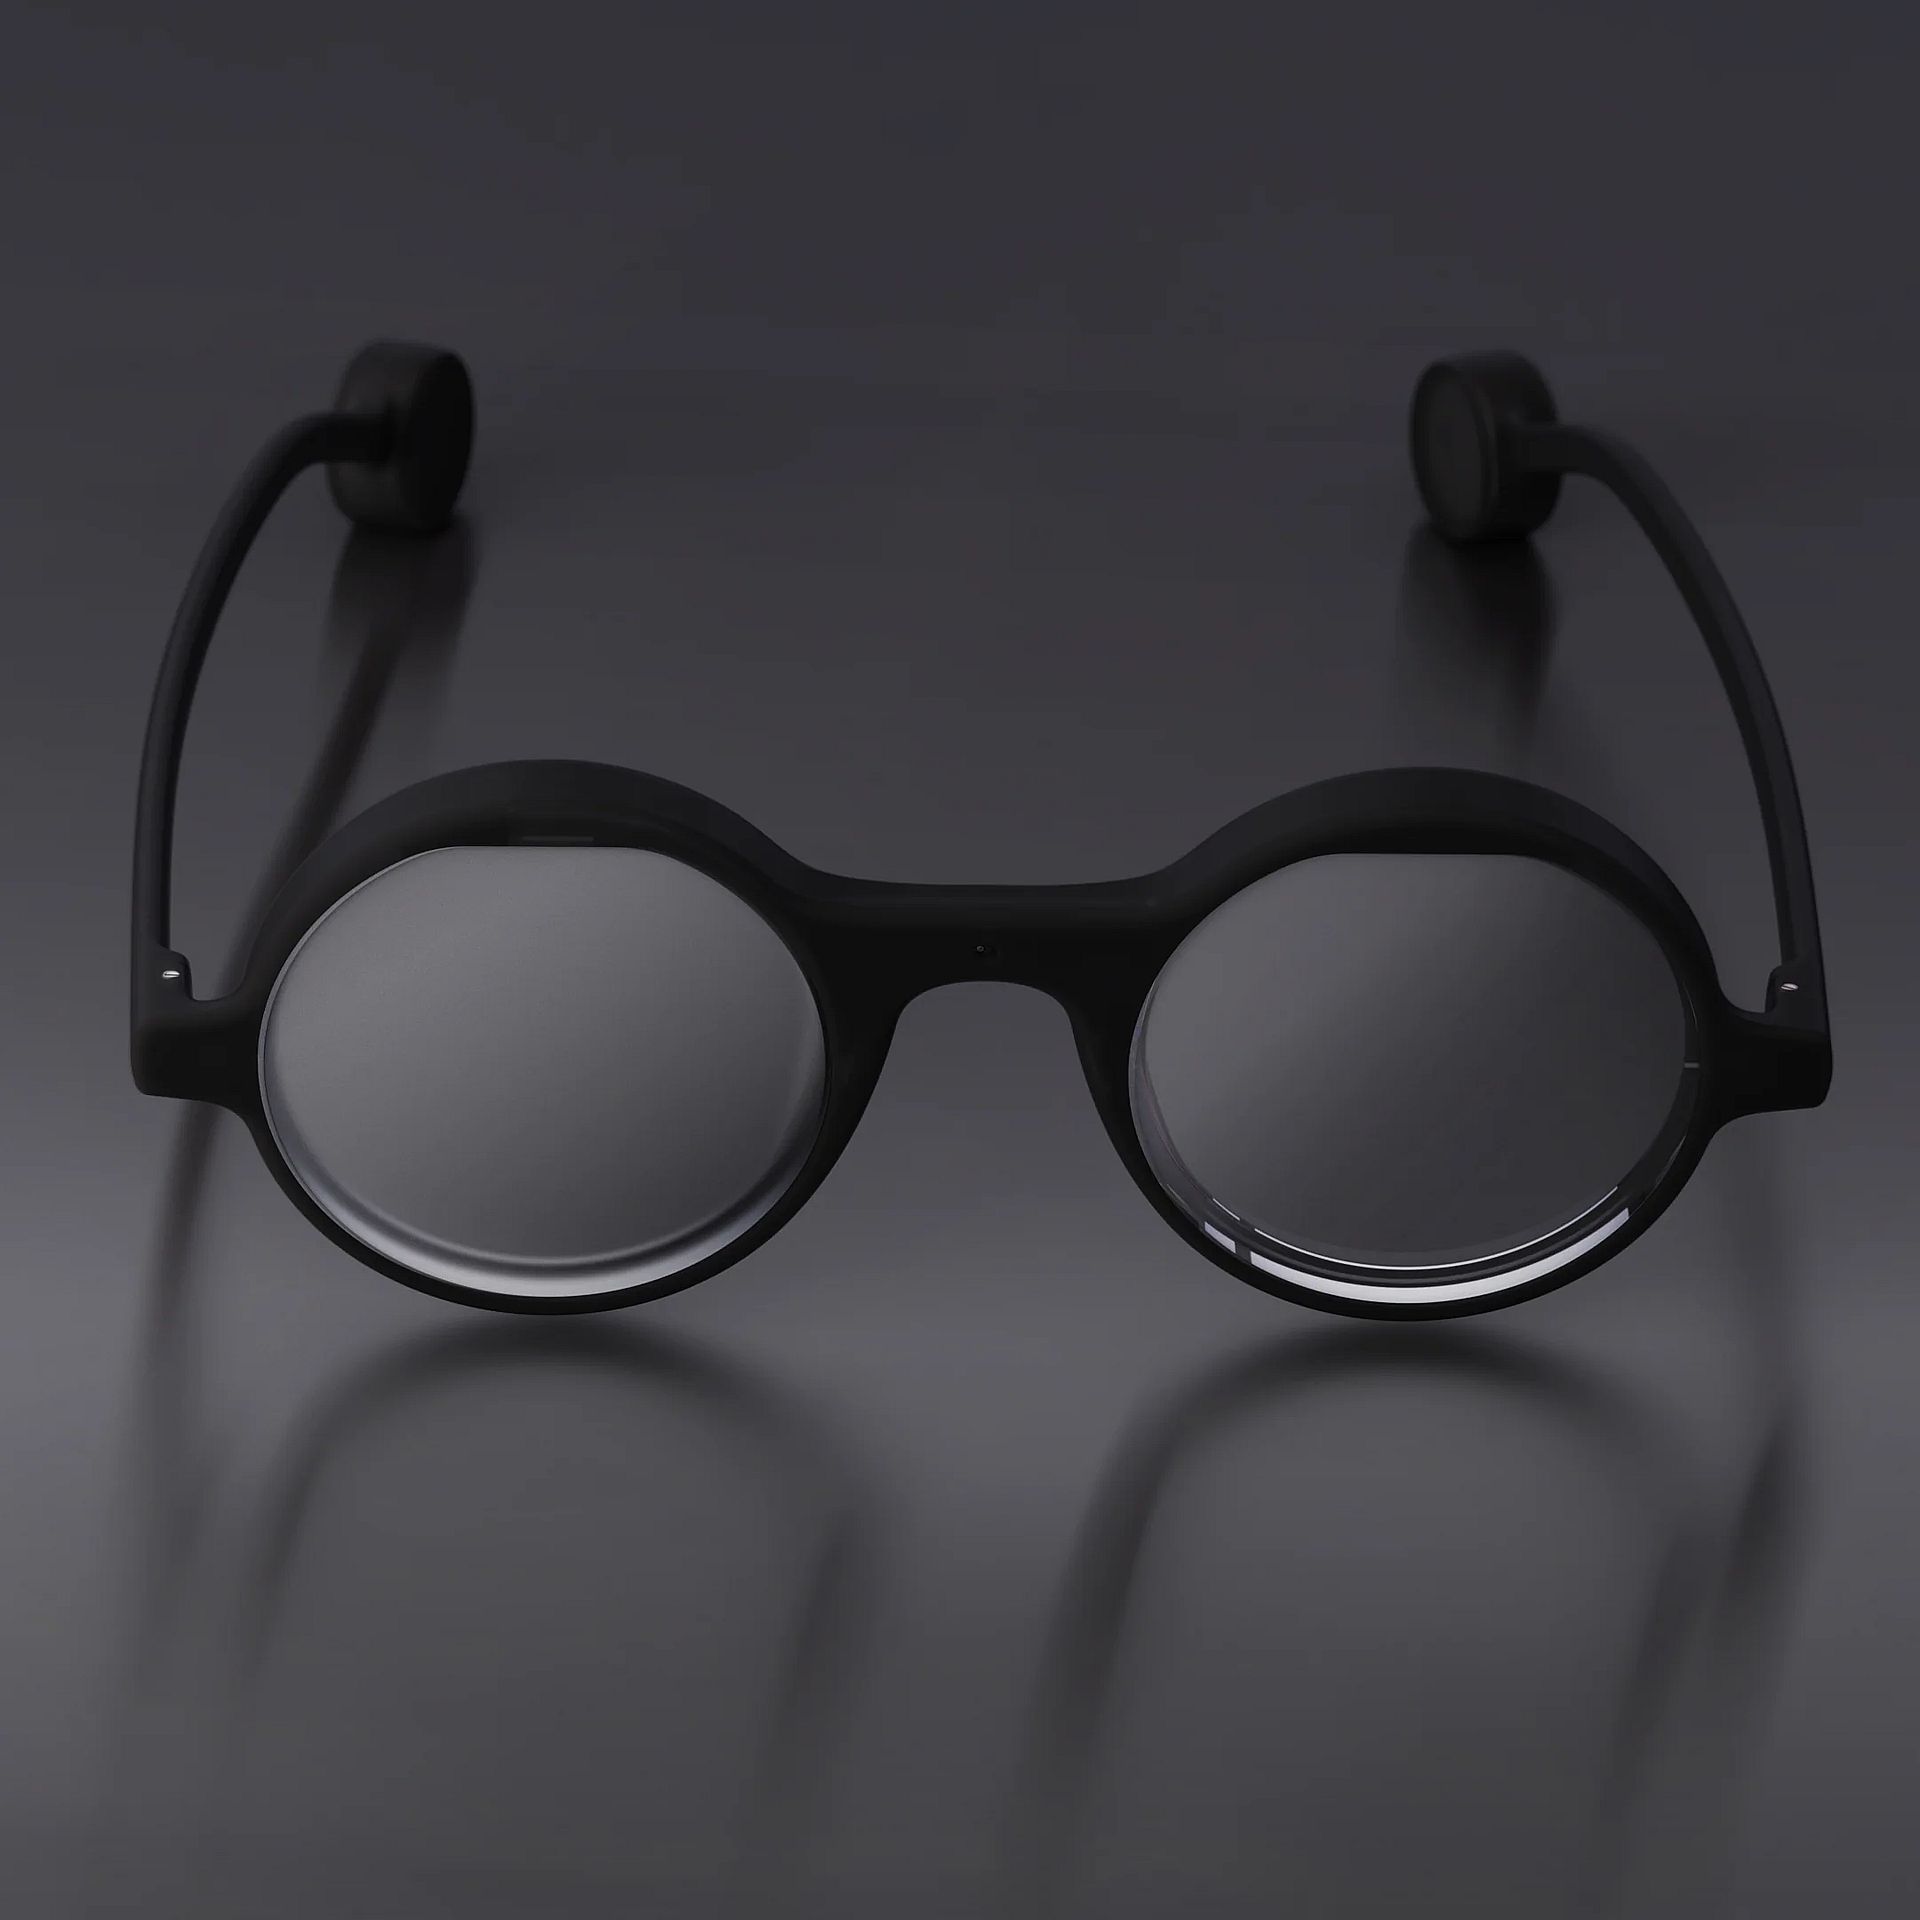 There is a new pair of AI glasses in town